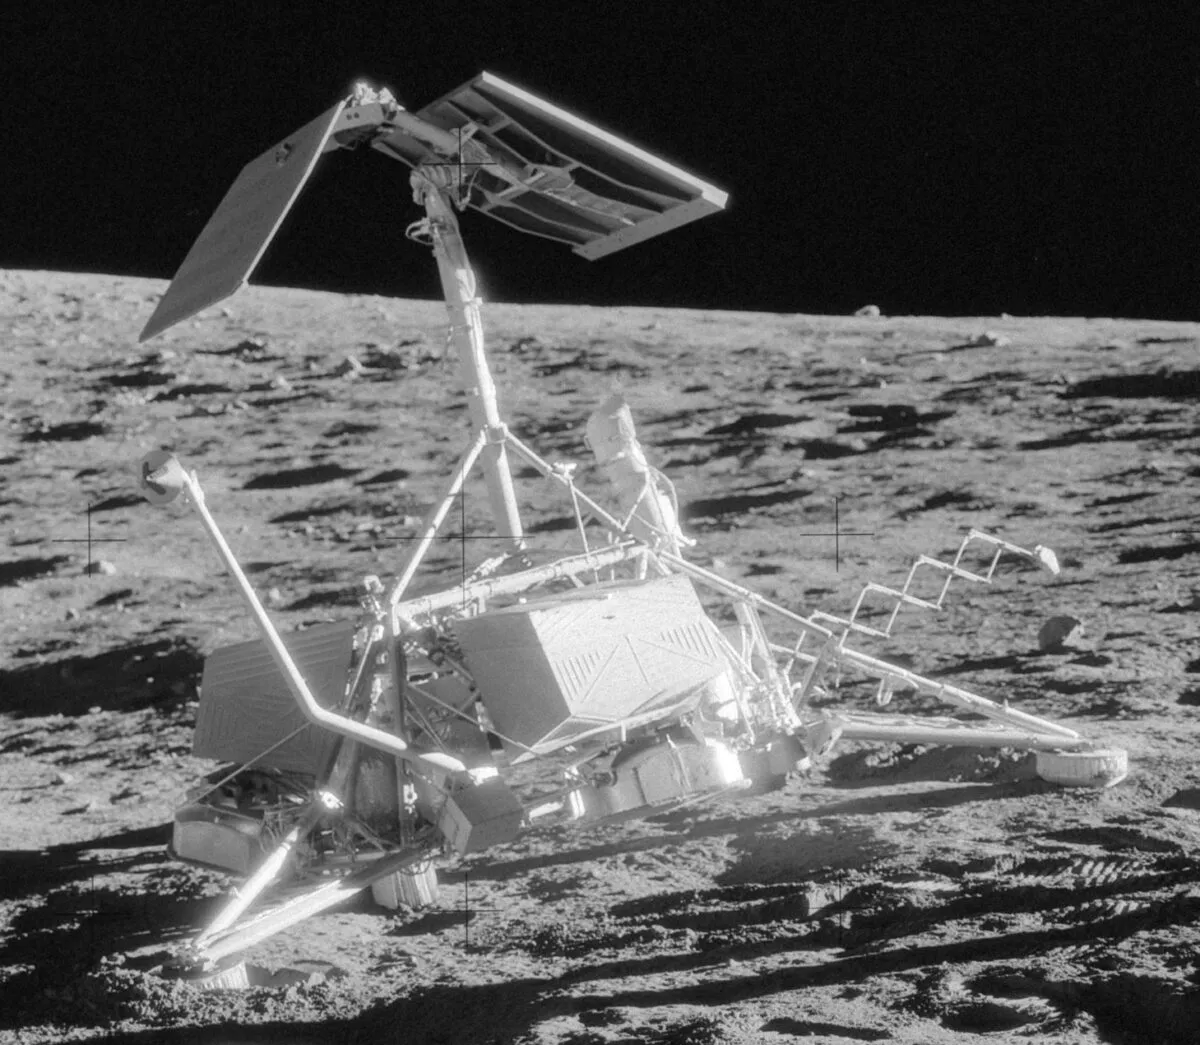 Lunar lander Surveyor 3 is said to have been the interplanetary ferry for Earth bacteria, which survived in a dormant state. Credit: NASA